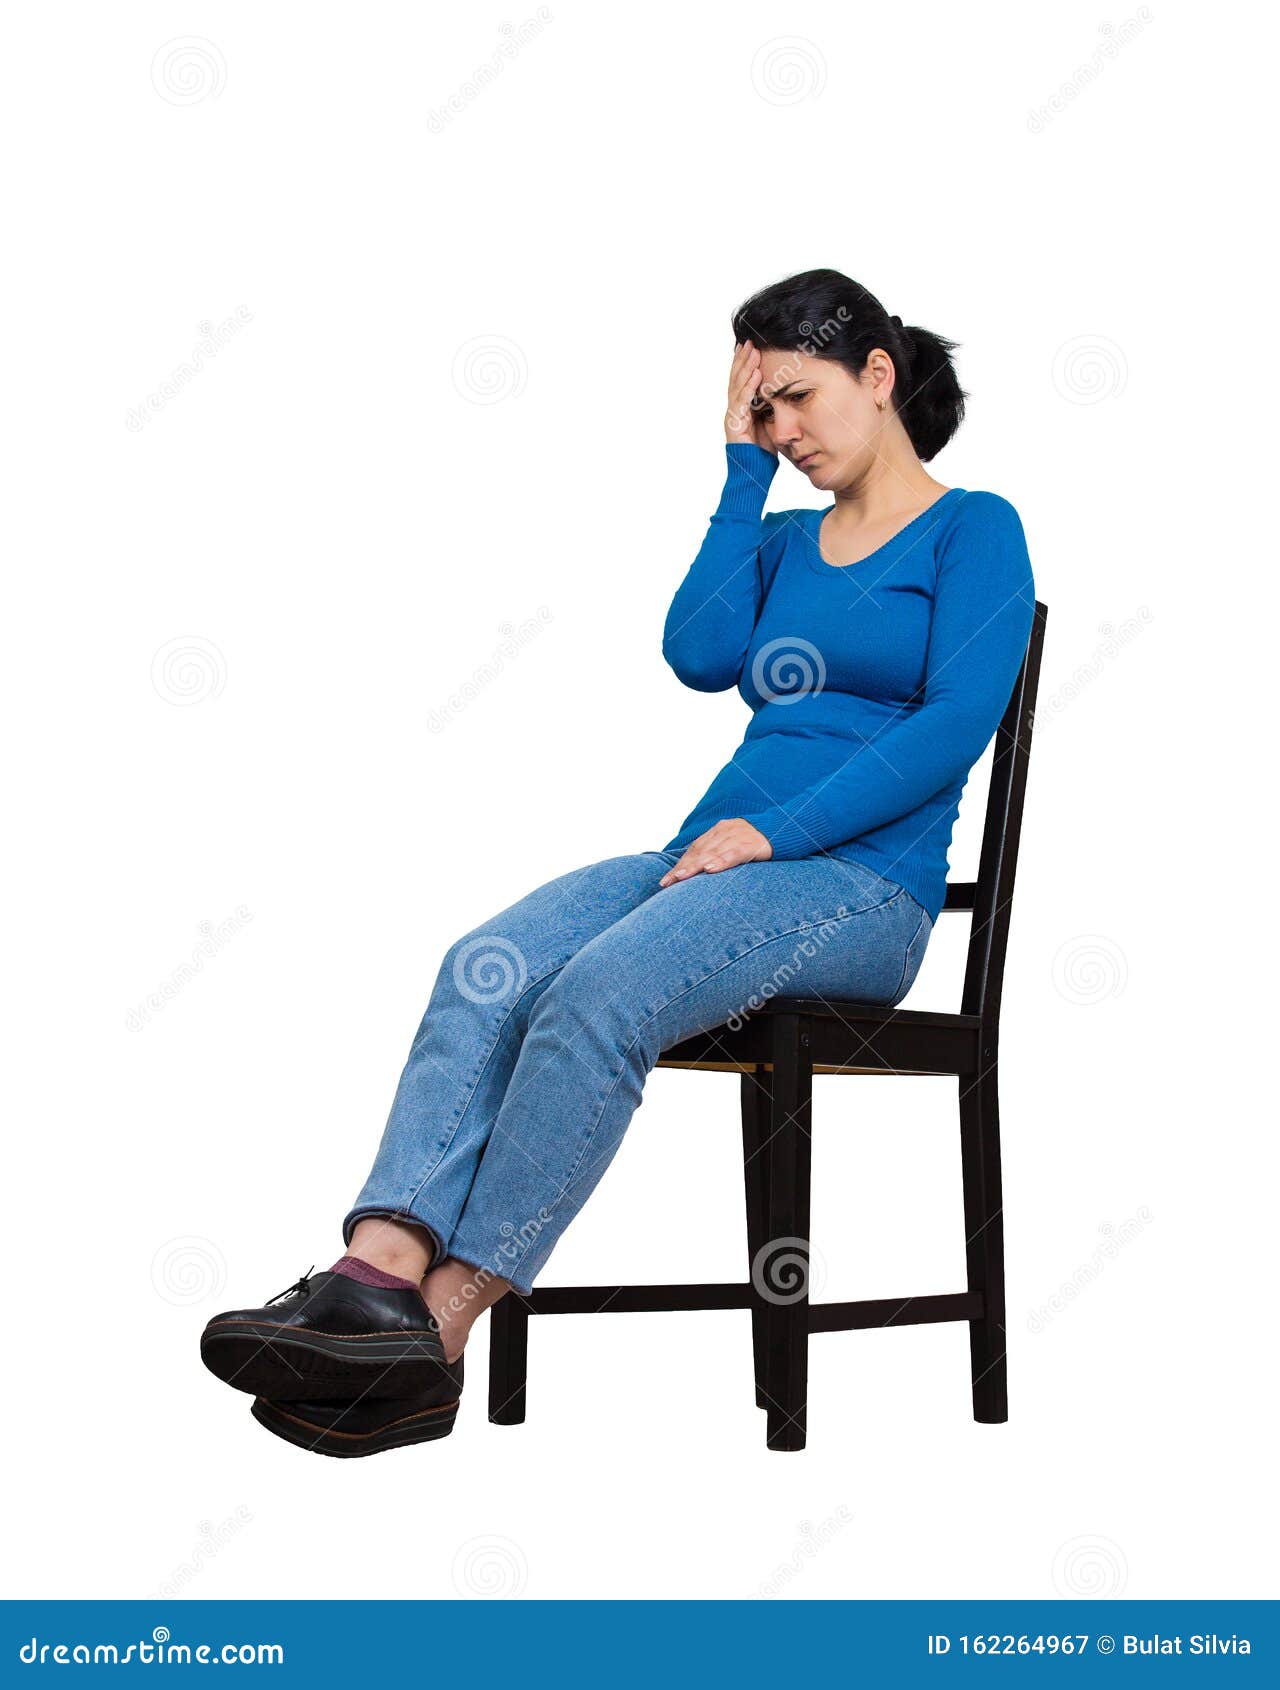 Sad and Disappointed Woman Sitting on a Chair Covering Her Face with Hand,  Full Length Isolated Over White Background. Desperate Stock Image - Image  of adult, crying: 162264967